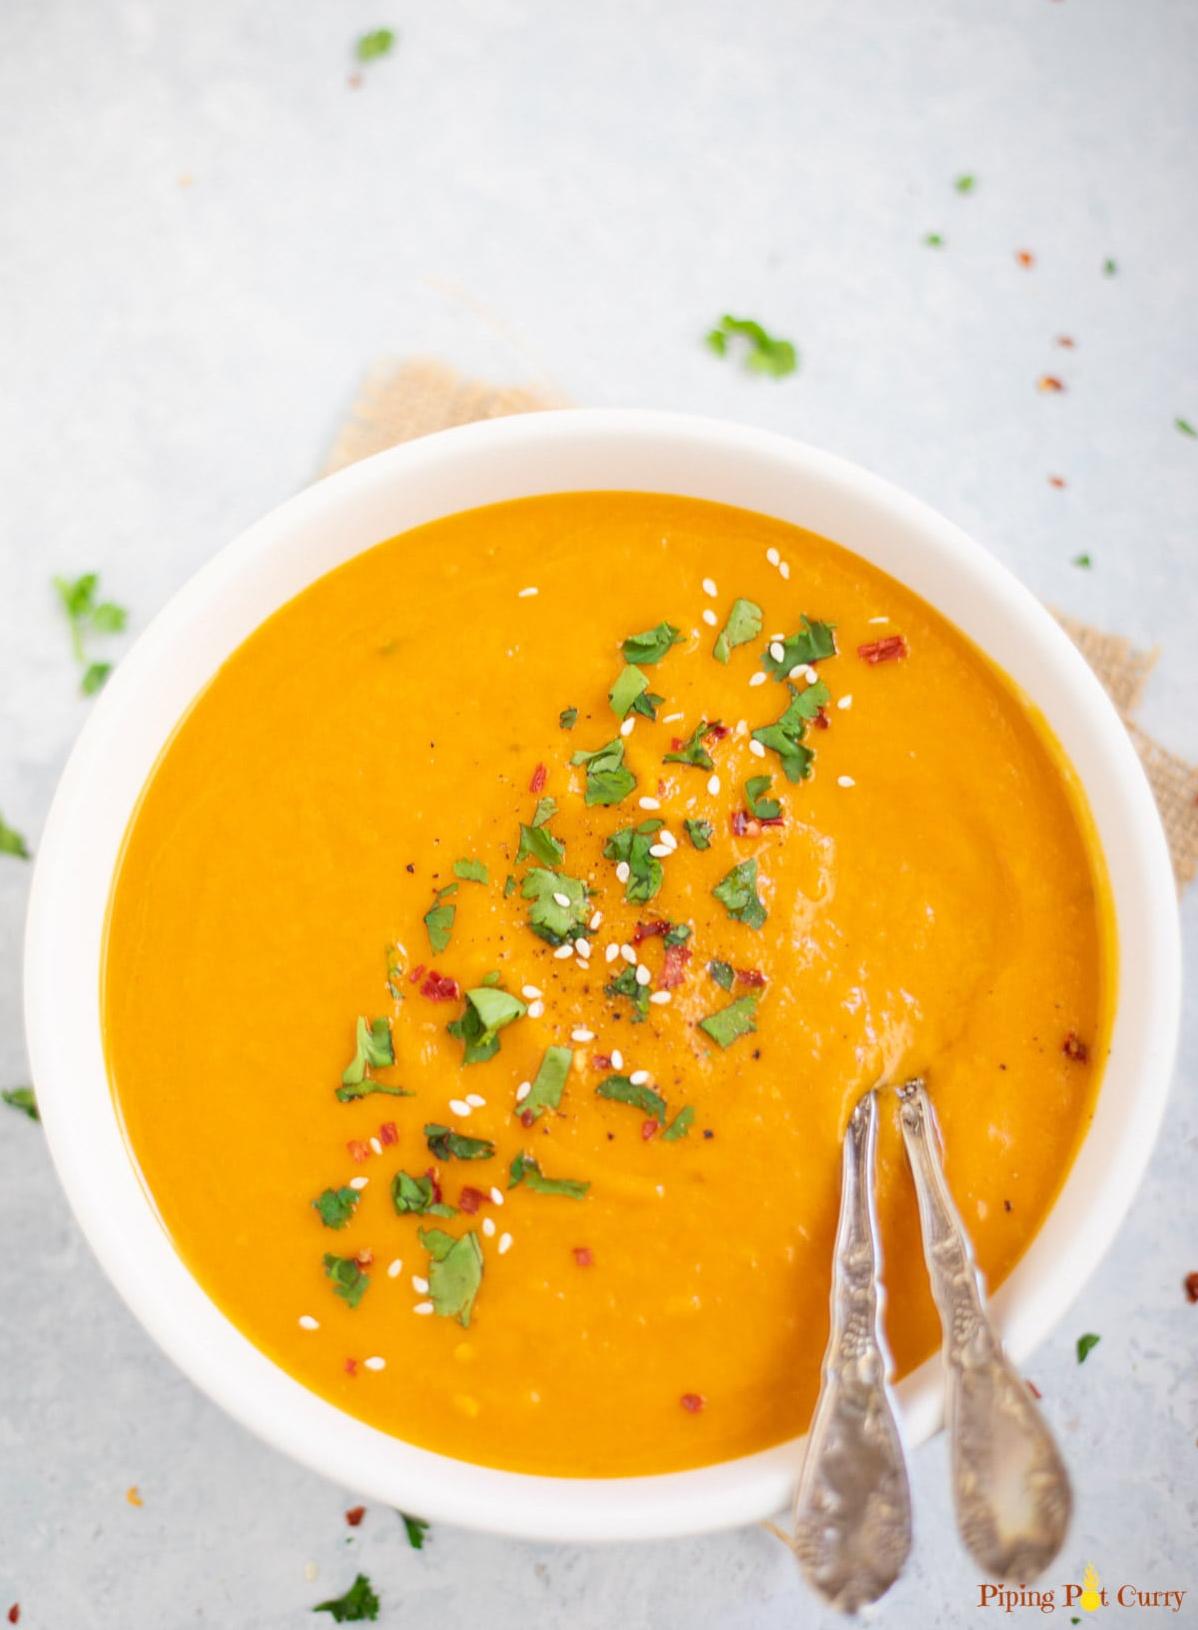  Who knew carrot soup could taste so good?